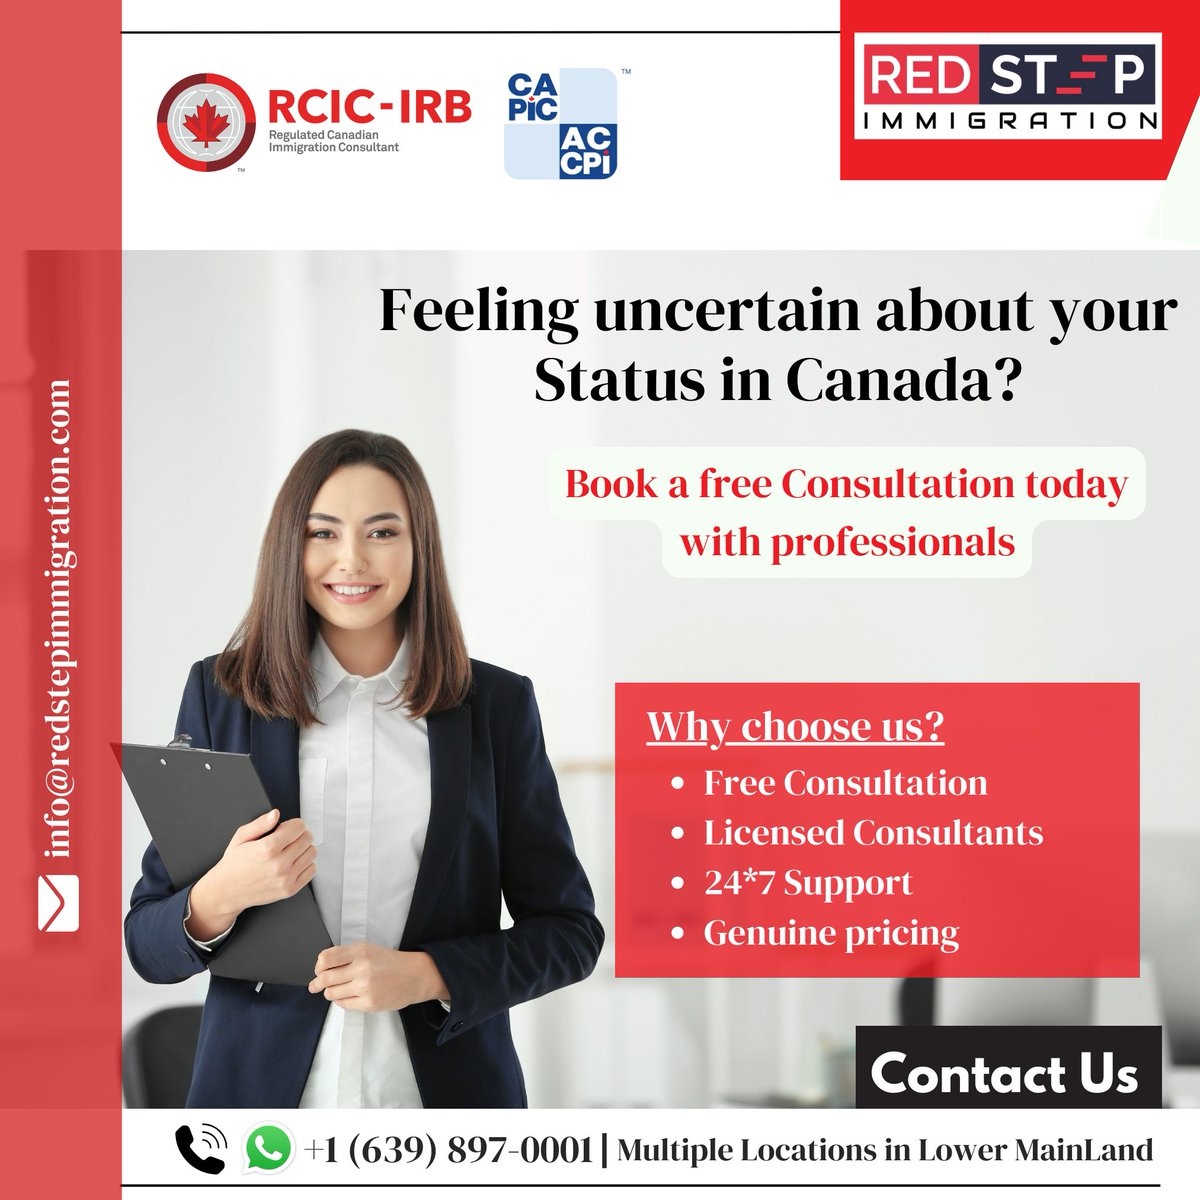 Not sure where you stand with Canadian immigration? Let's chat about your profile! Schedule a free consultation with our immigration experts today and gain clarity on your path to Canada. 🍁

Book a free consultation, call us today (639) 897-0001
#RedStepImmigration